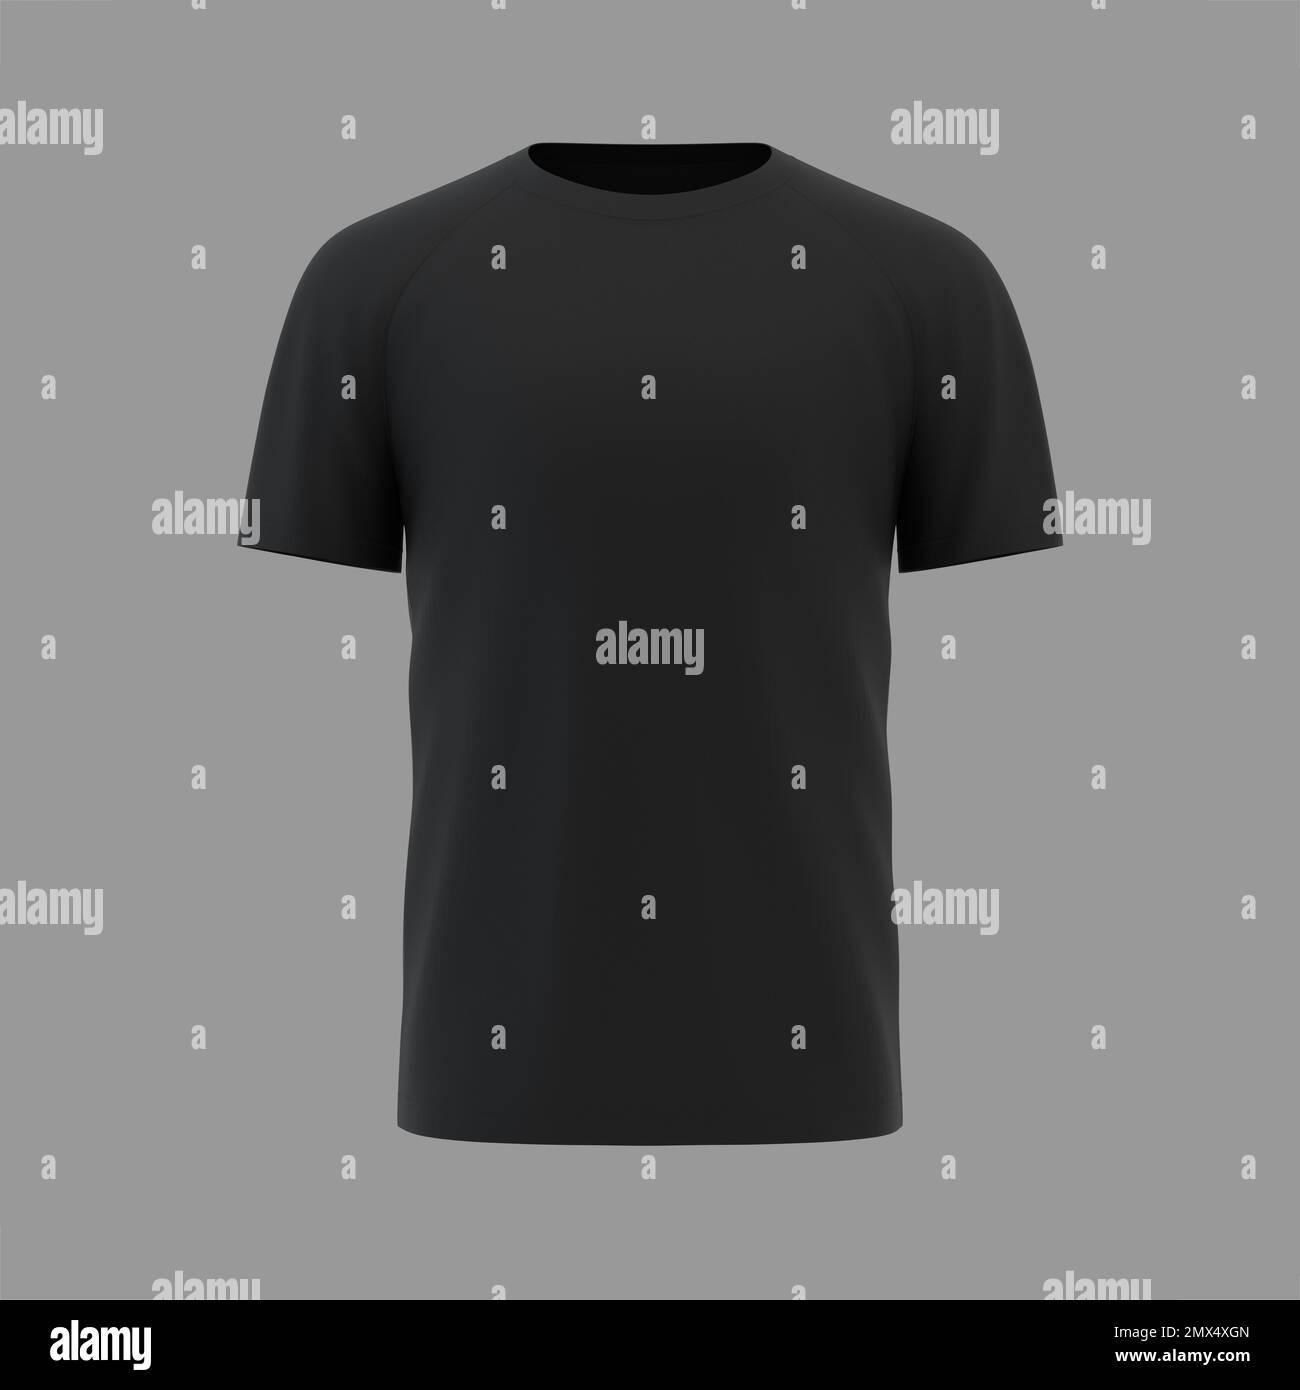 Blank black shirt mockup template, front and back view, isolated on ...